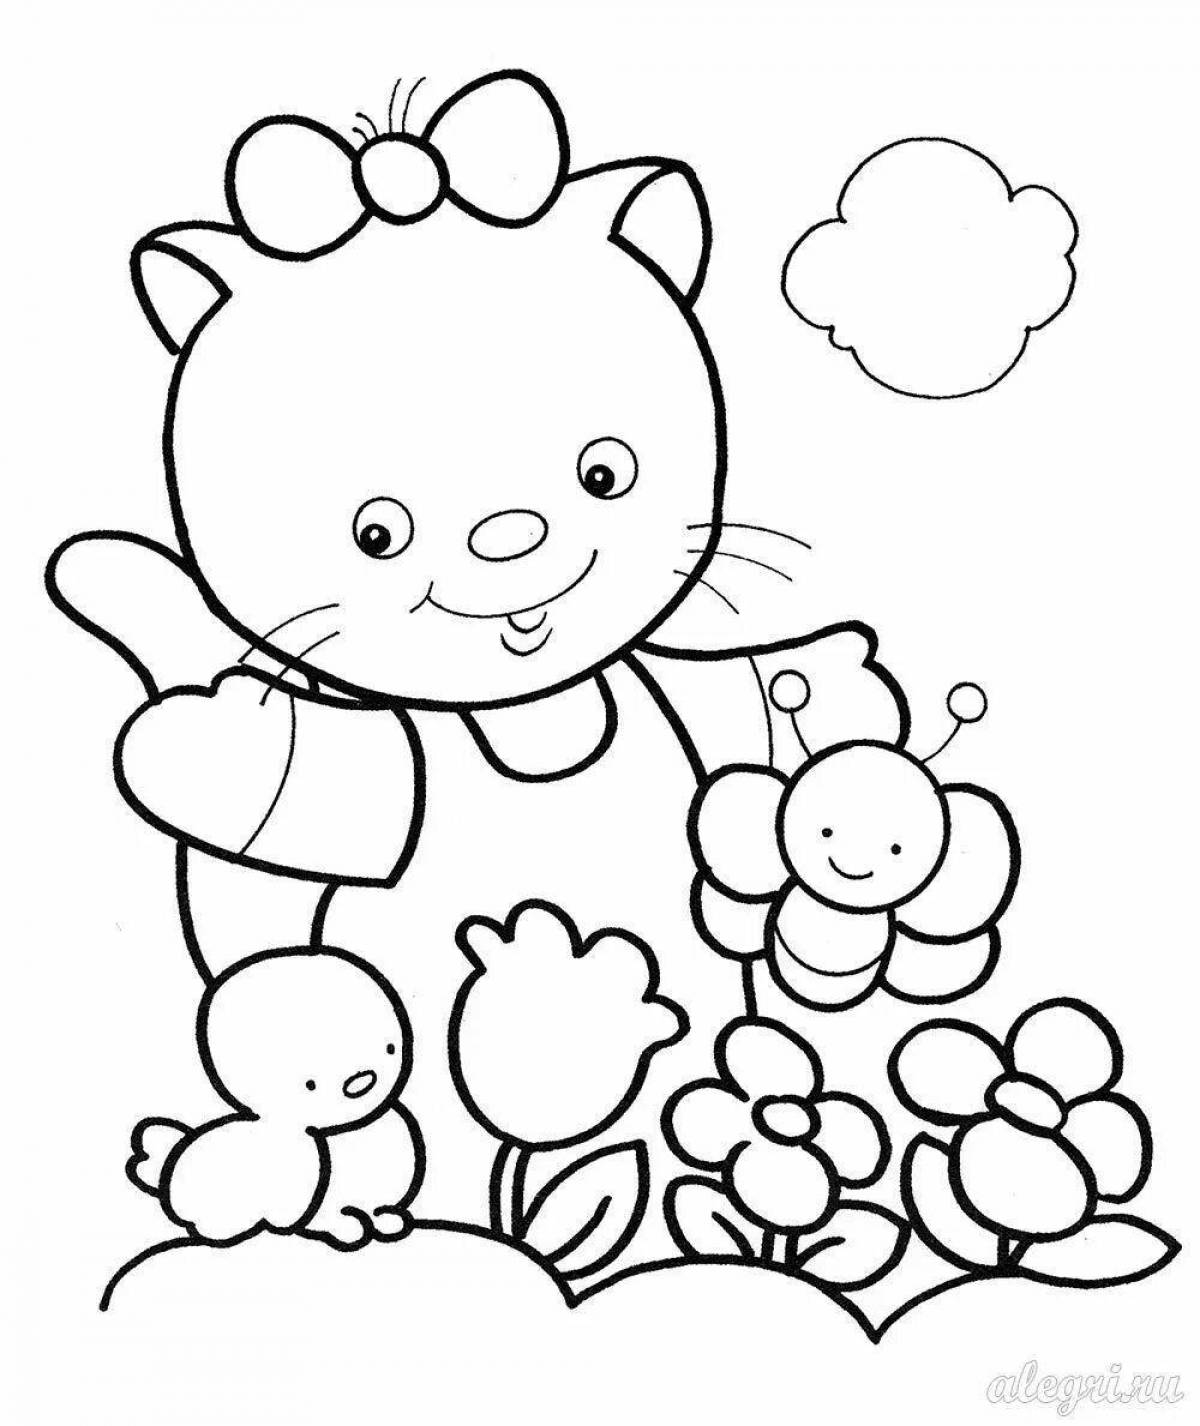 Fun coloring for girls 4 years old